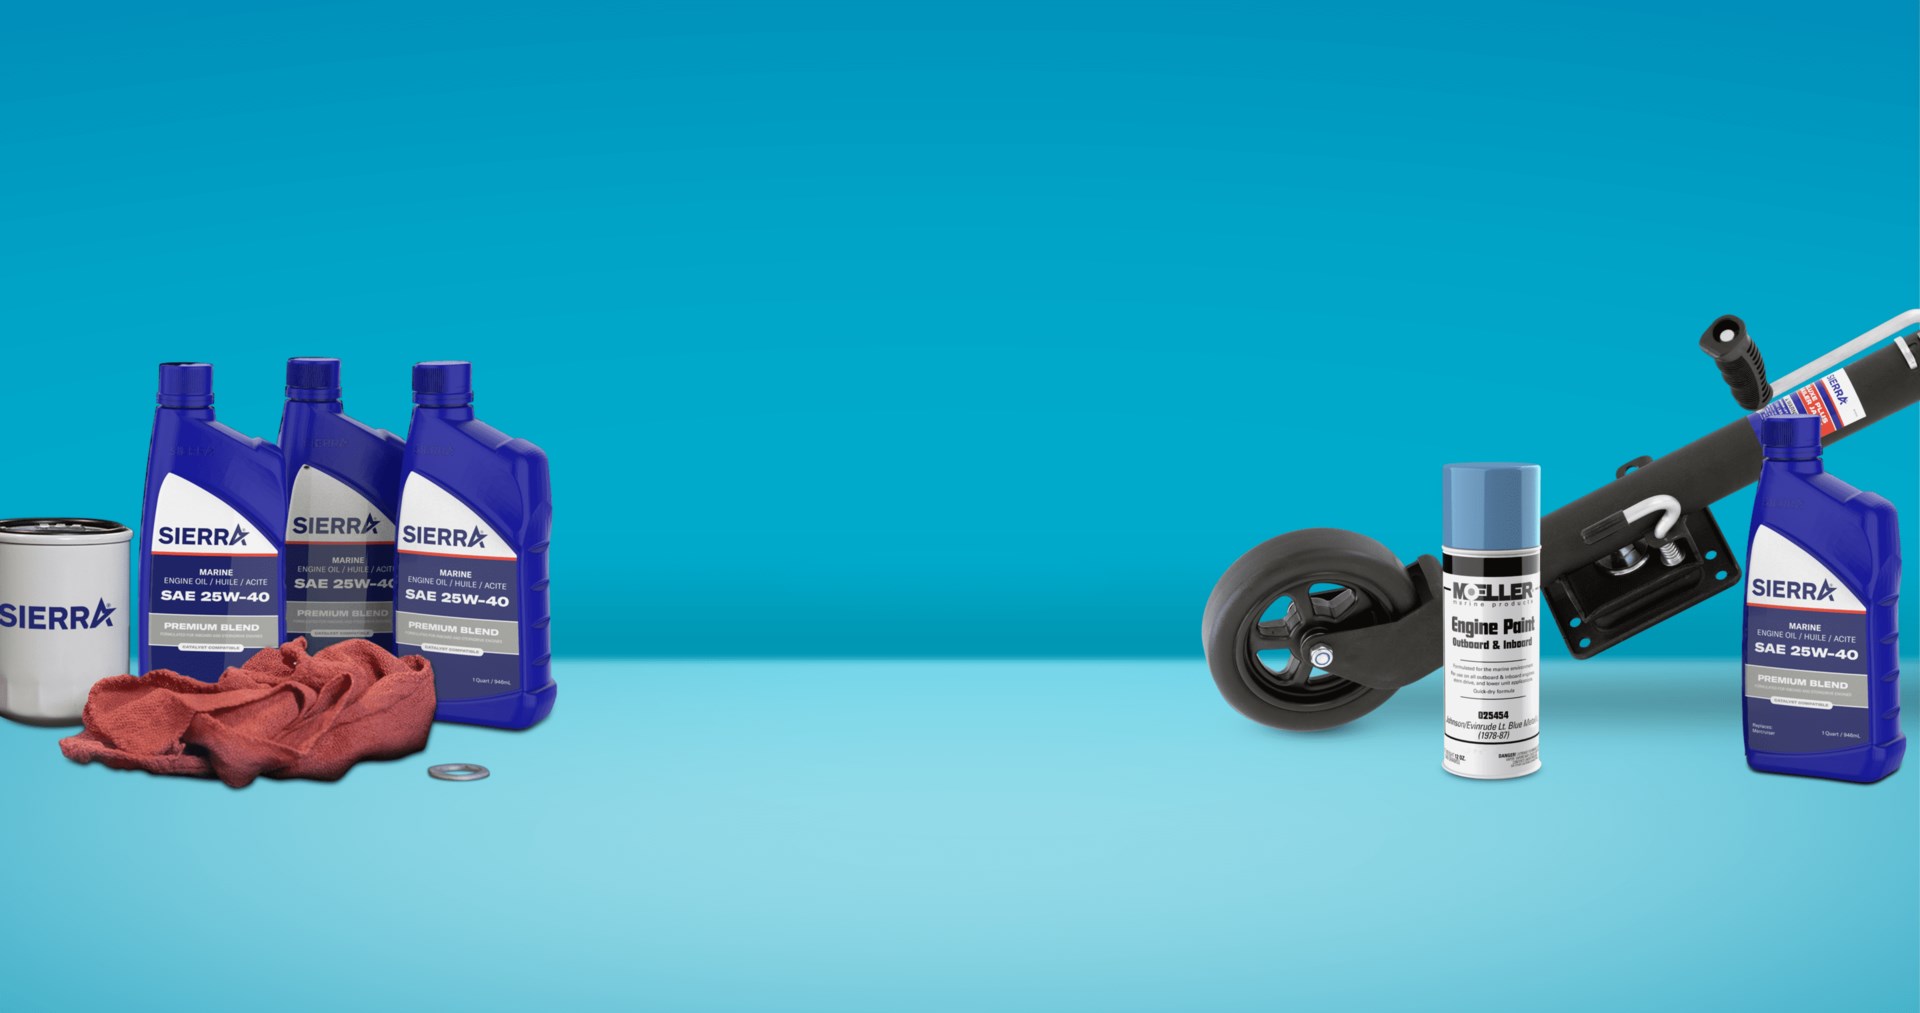 A collection of Sierra products, including marine engine oil, filters, engine spray paint, and a trailer jack, against a light blue background